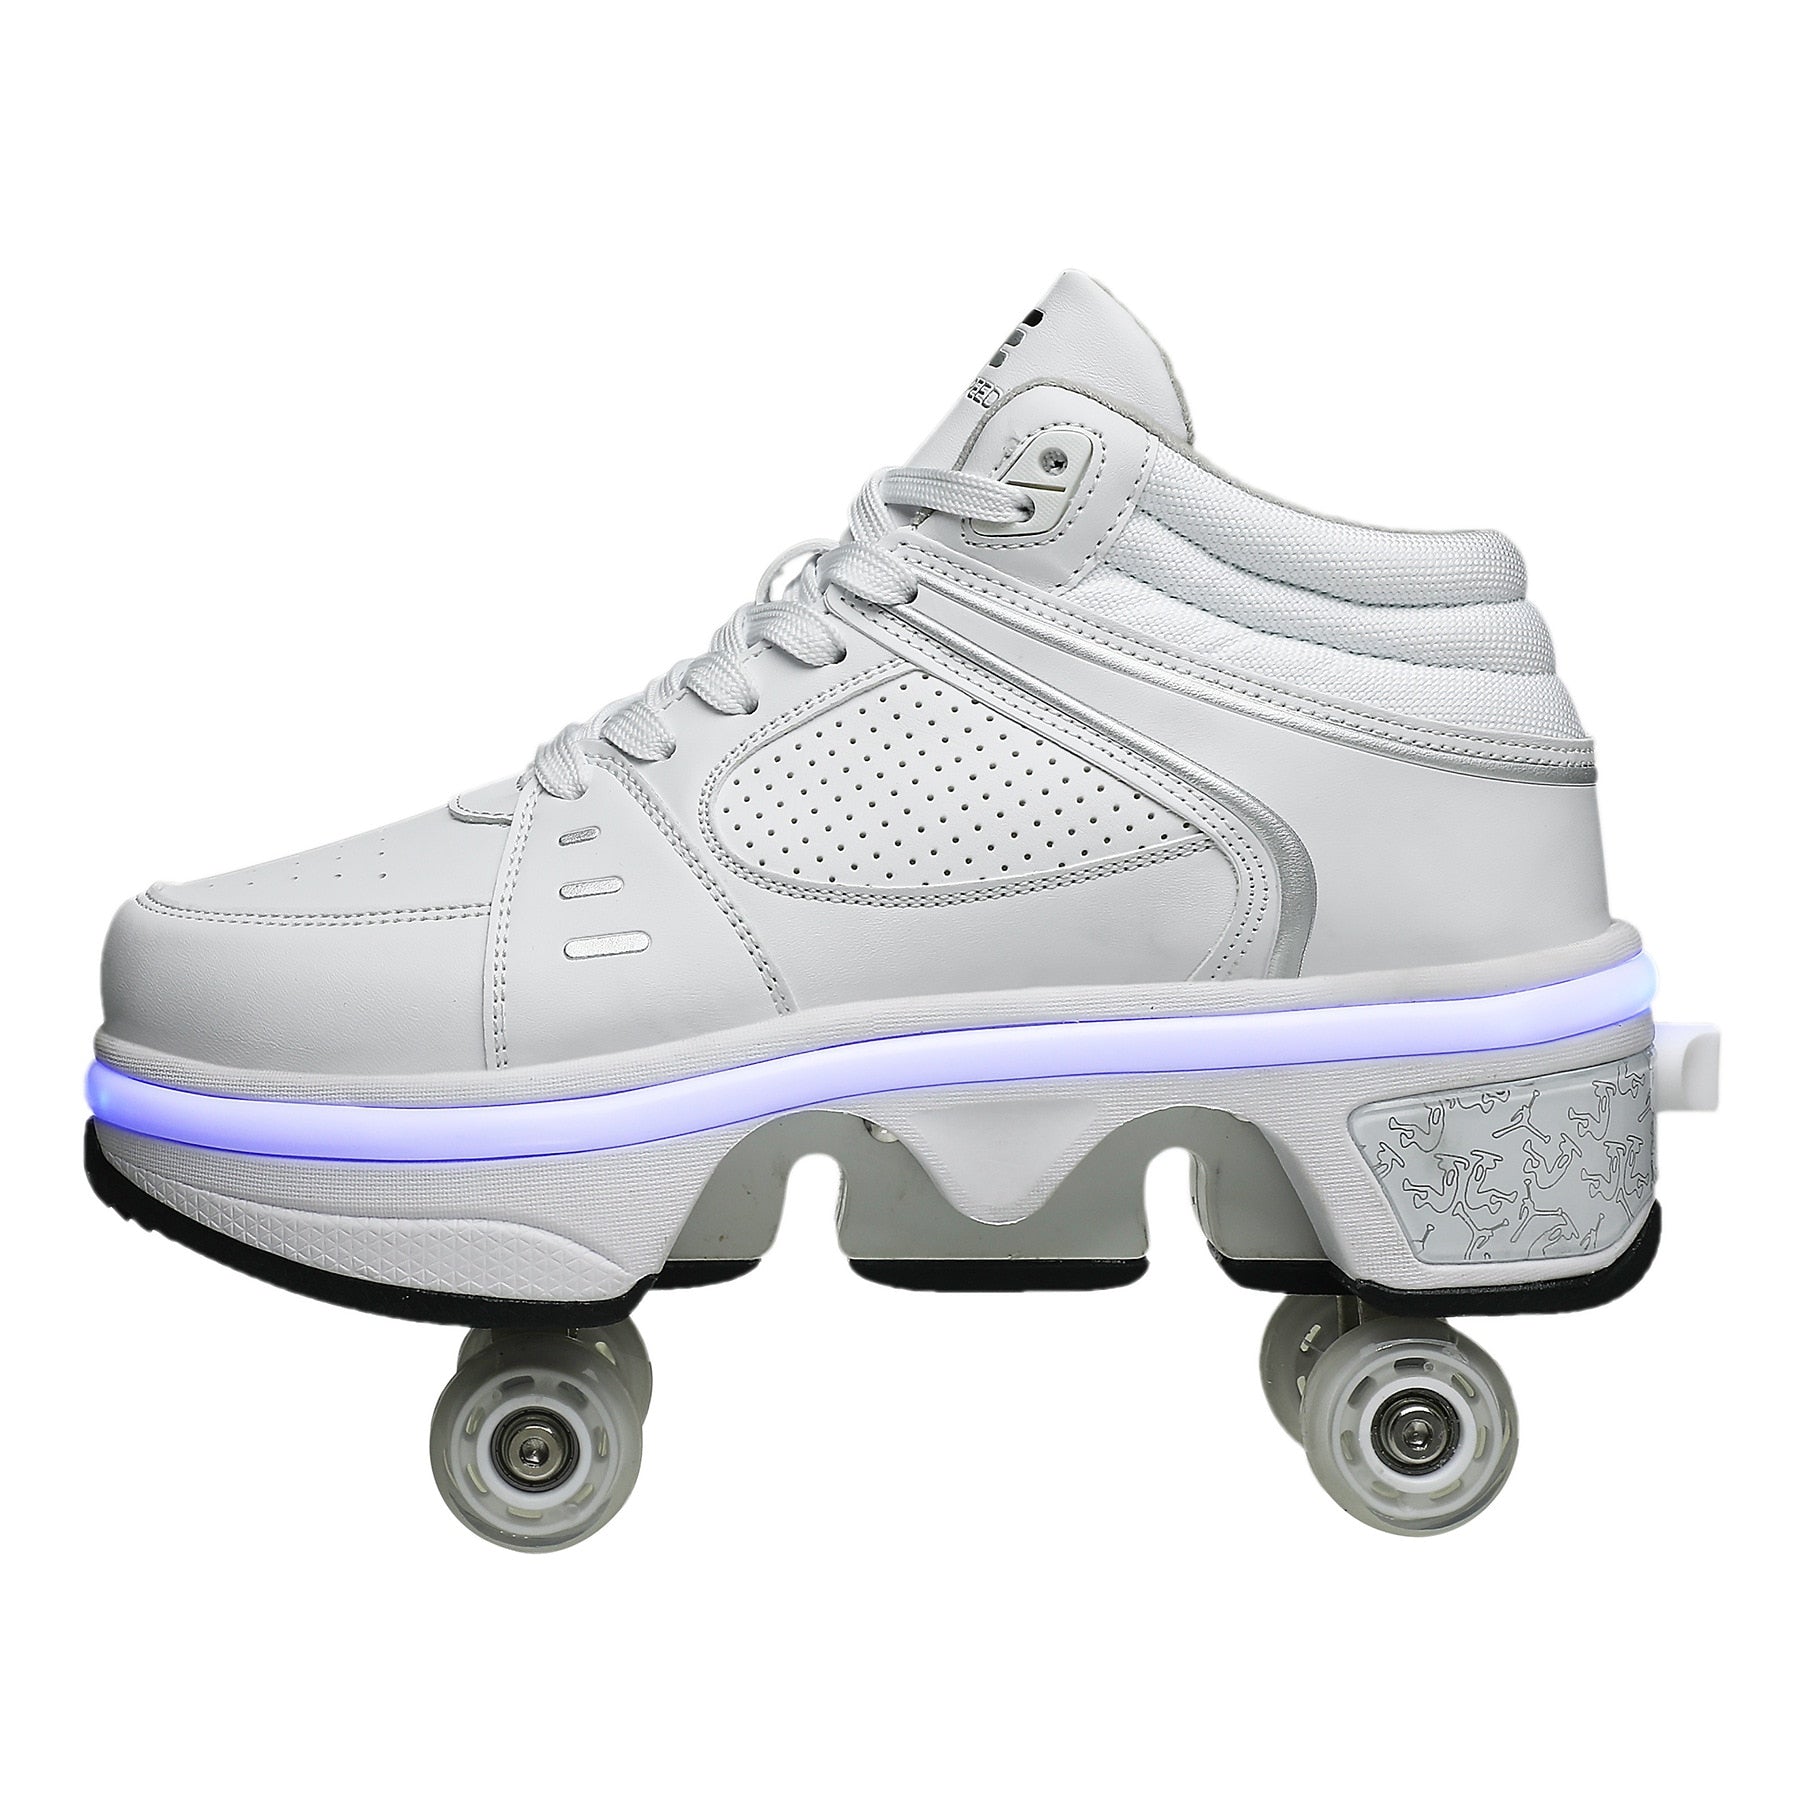 il rotolo 2 Dual-purpose Roller Skating Deformation Shoes